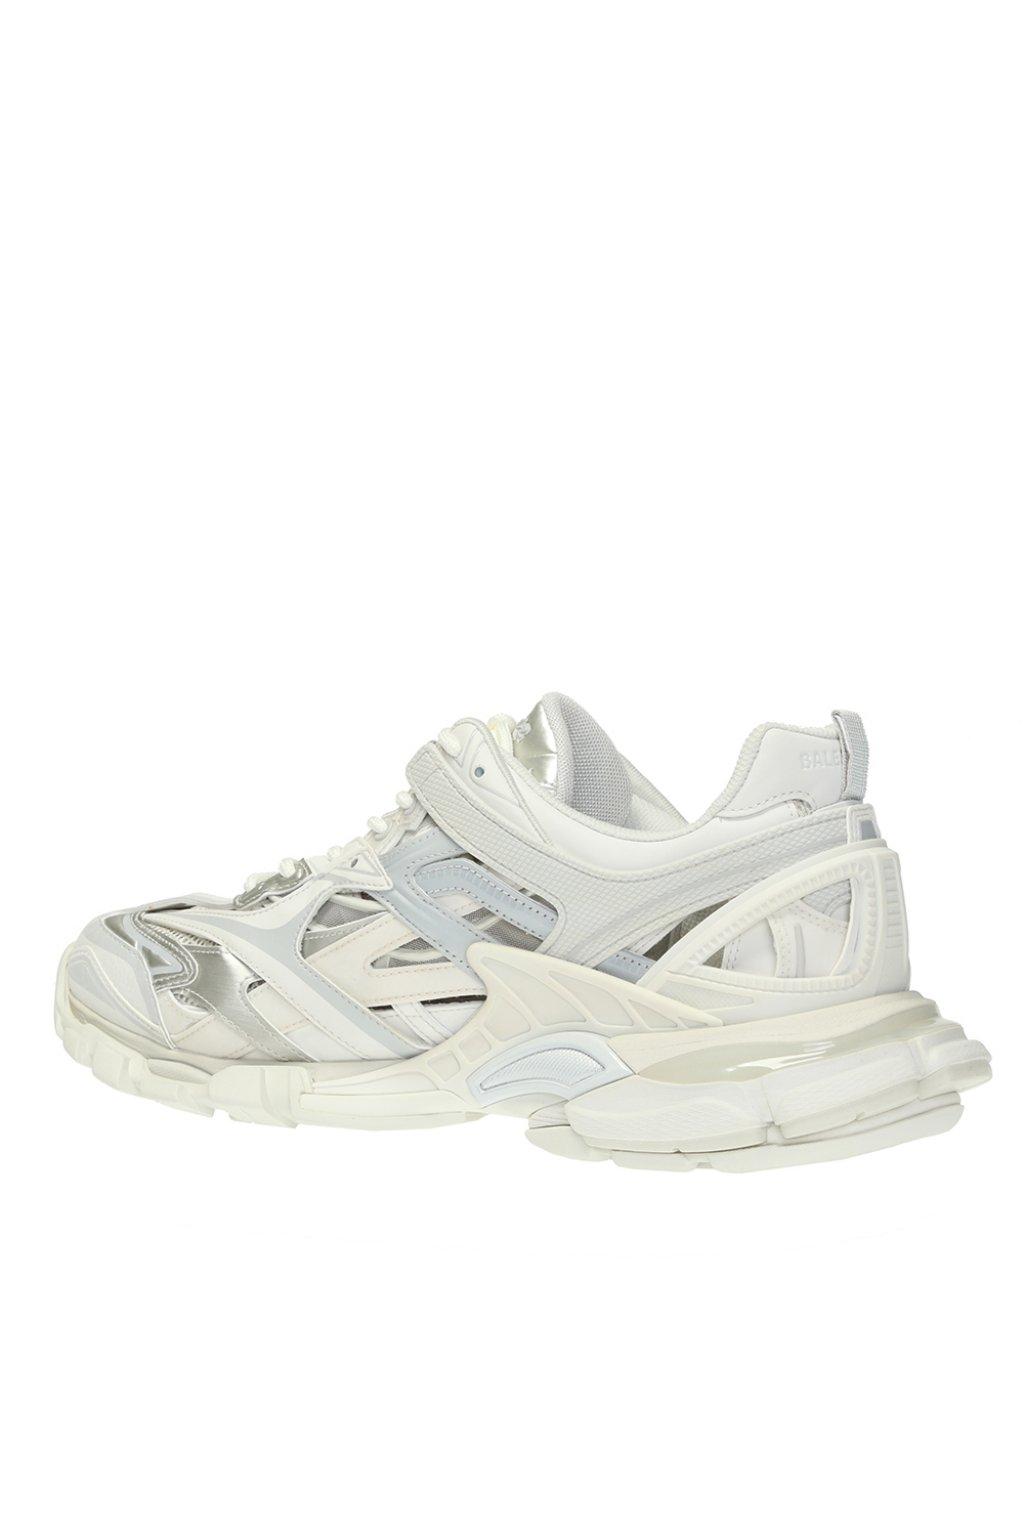 Balenciaga Rubber 'track.2' Sneakers in Grey (Gray) for Men - Lyst